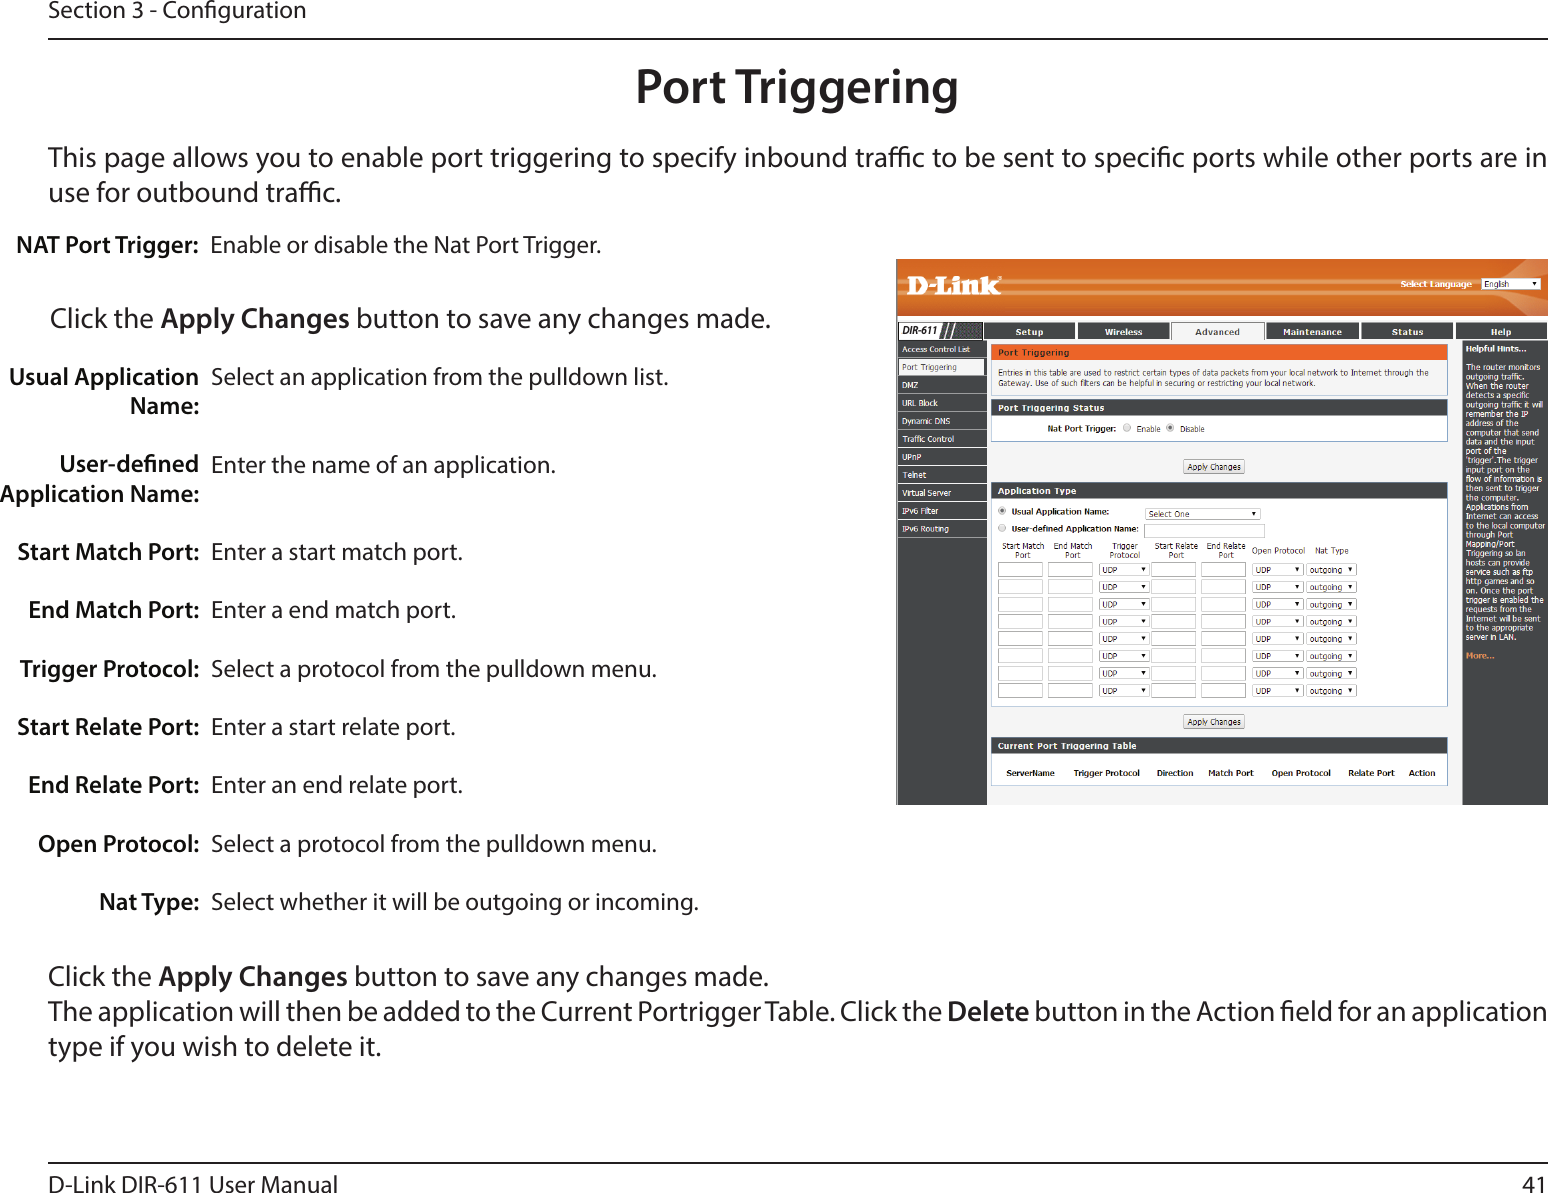 41D-Link DIR-611 User ManualSection 3 - CongurationThis page allows you to enable port triggering to specify inbound trac to be sent to specic ports while other ports are in use for outbound trac.Port TriggeringEnable or disable the Nat Port Trigger.NAT Port Trigger:Click the Apply Changes button to save any changes made.Select an application from the pulldown list.Enter the name of an application.Enter a start match port.Enter a end match port.Select a protocol from the pulldown menu.Enter a start relate port.Enter an end relate port.Select a protocol from the pulldown menu.Select whether it will be outgoing or incoming. Usual Application Name:User-dened Application Name:Start Match Port:End Match Port:Trigger Protocol:Start Relate Port:End Relate Port:Open Protocol:Nat Type:Click the Apply Changes button to save any changes made. The application will then be added to the Current Portrigger Table. Click the Delete button in the Action eld for an application type if you wish to delete it.DIR-611